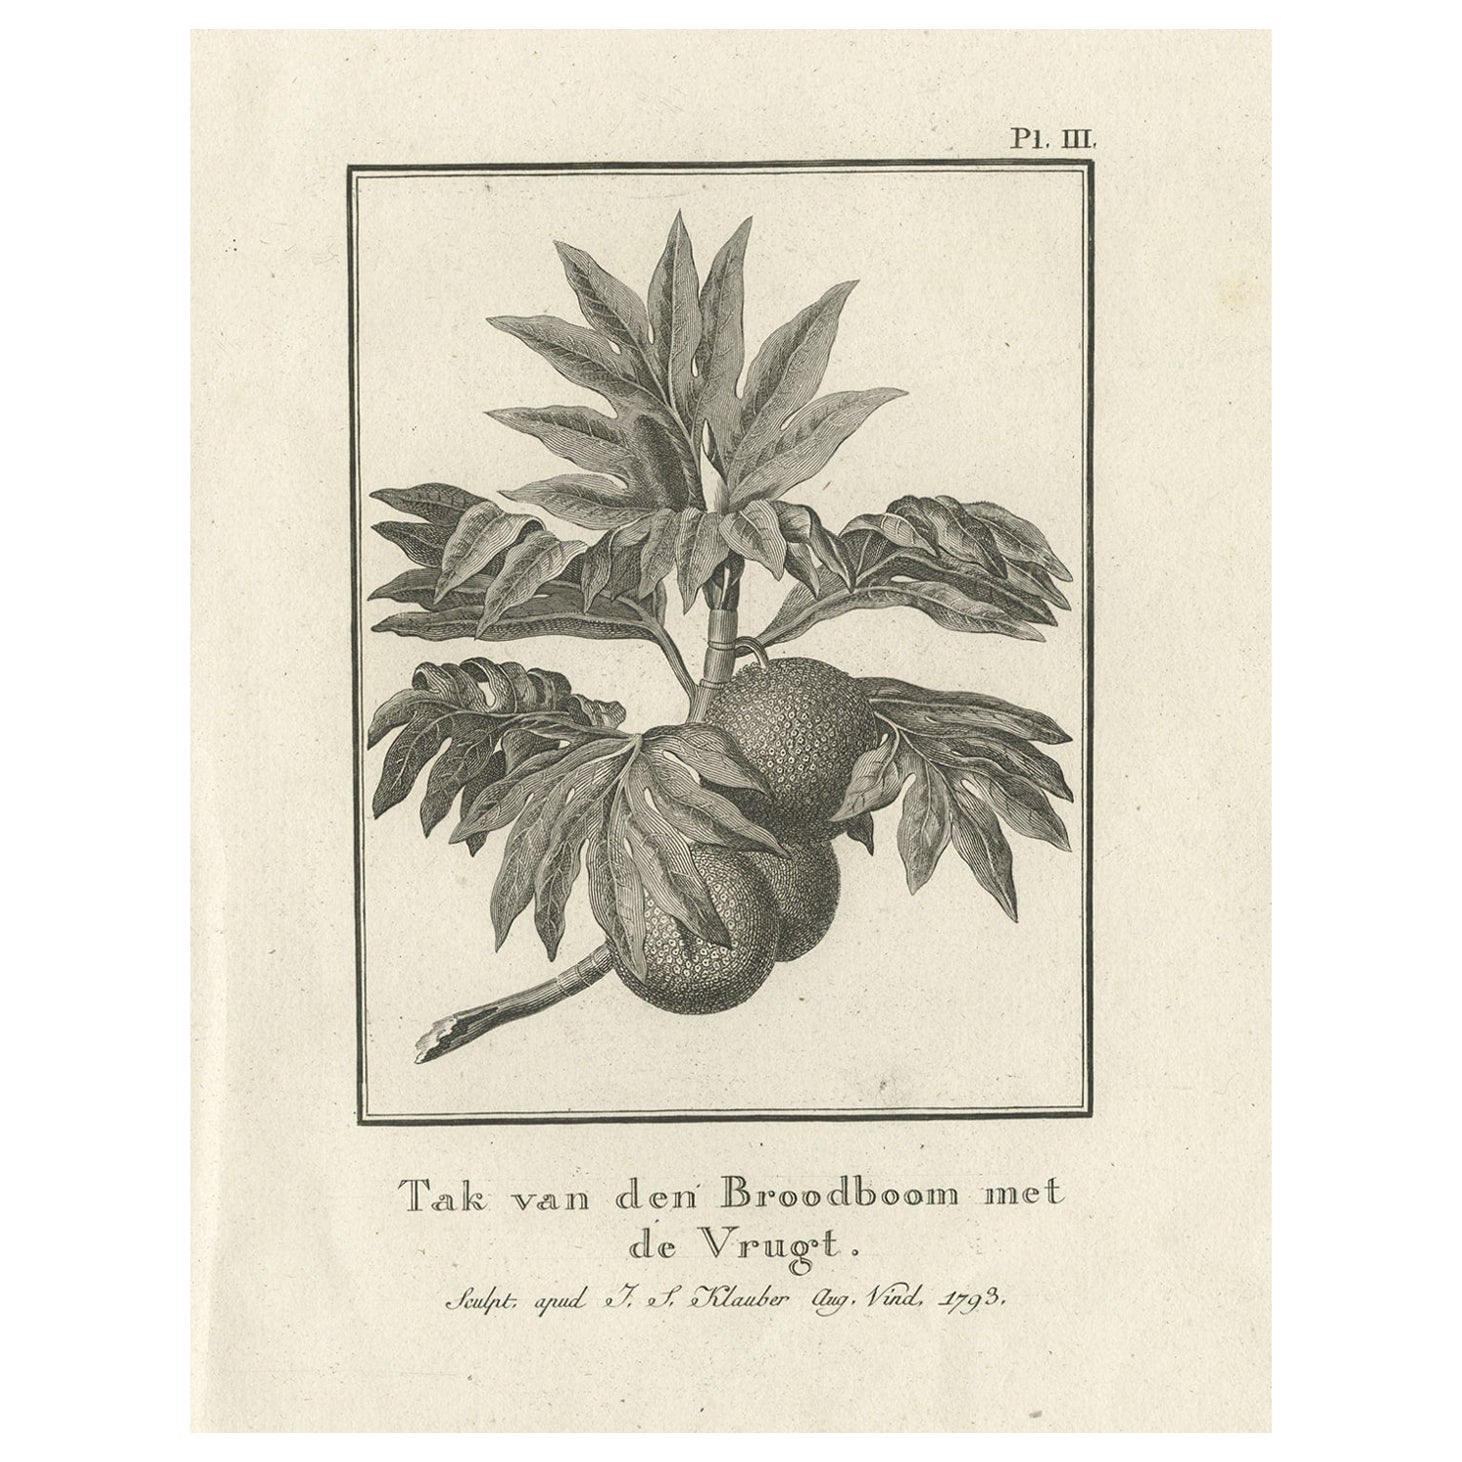 Rare Antique Engraving of a Breadfruit Tree from Captain Cooks' Travels, 1803